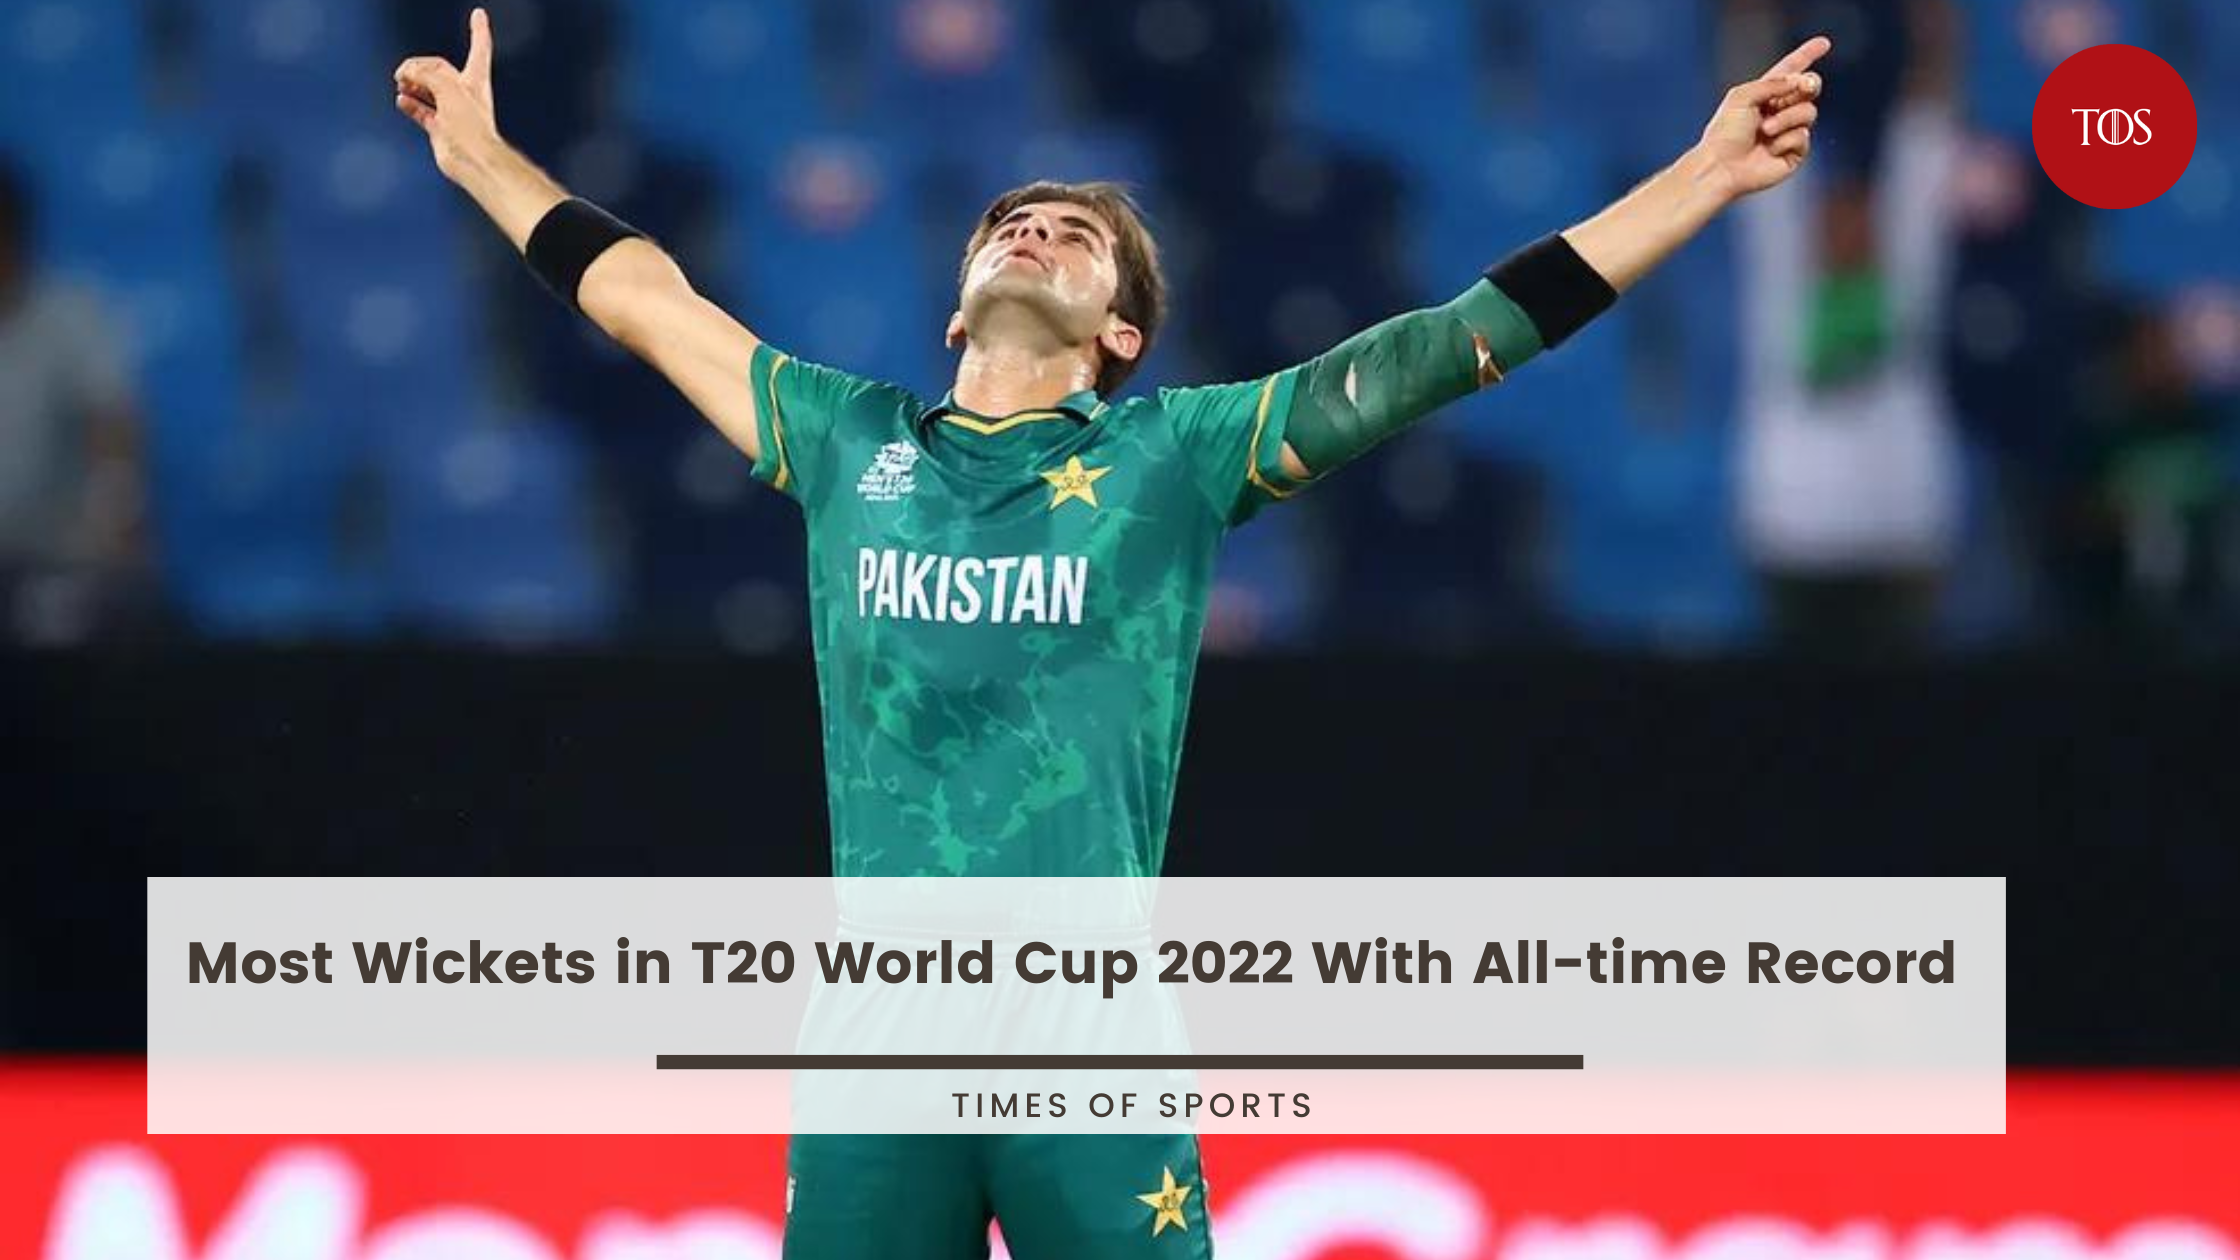 Most Wickets in T20 World Cup 2022 With Alltime Record